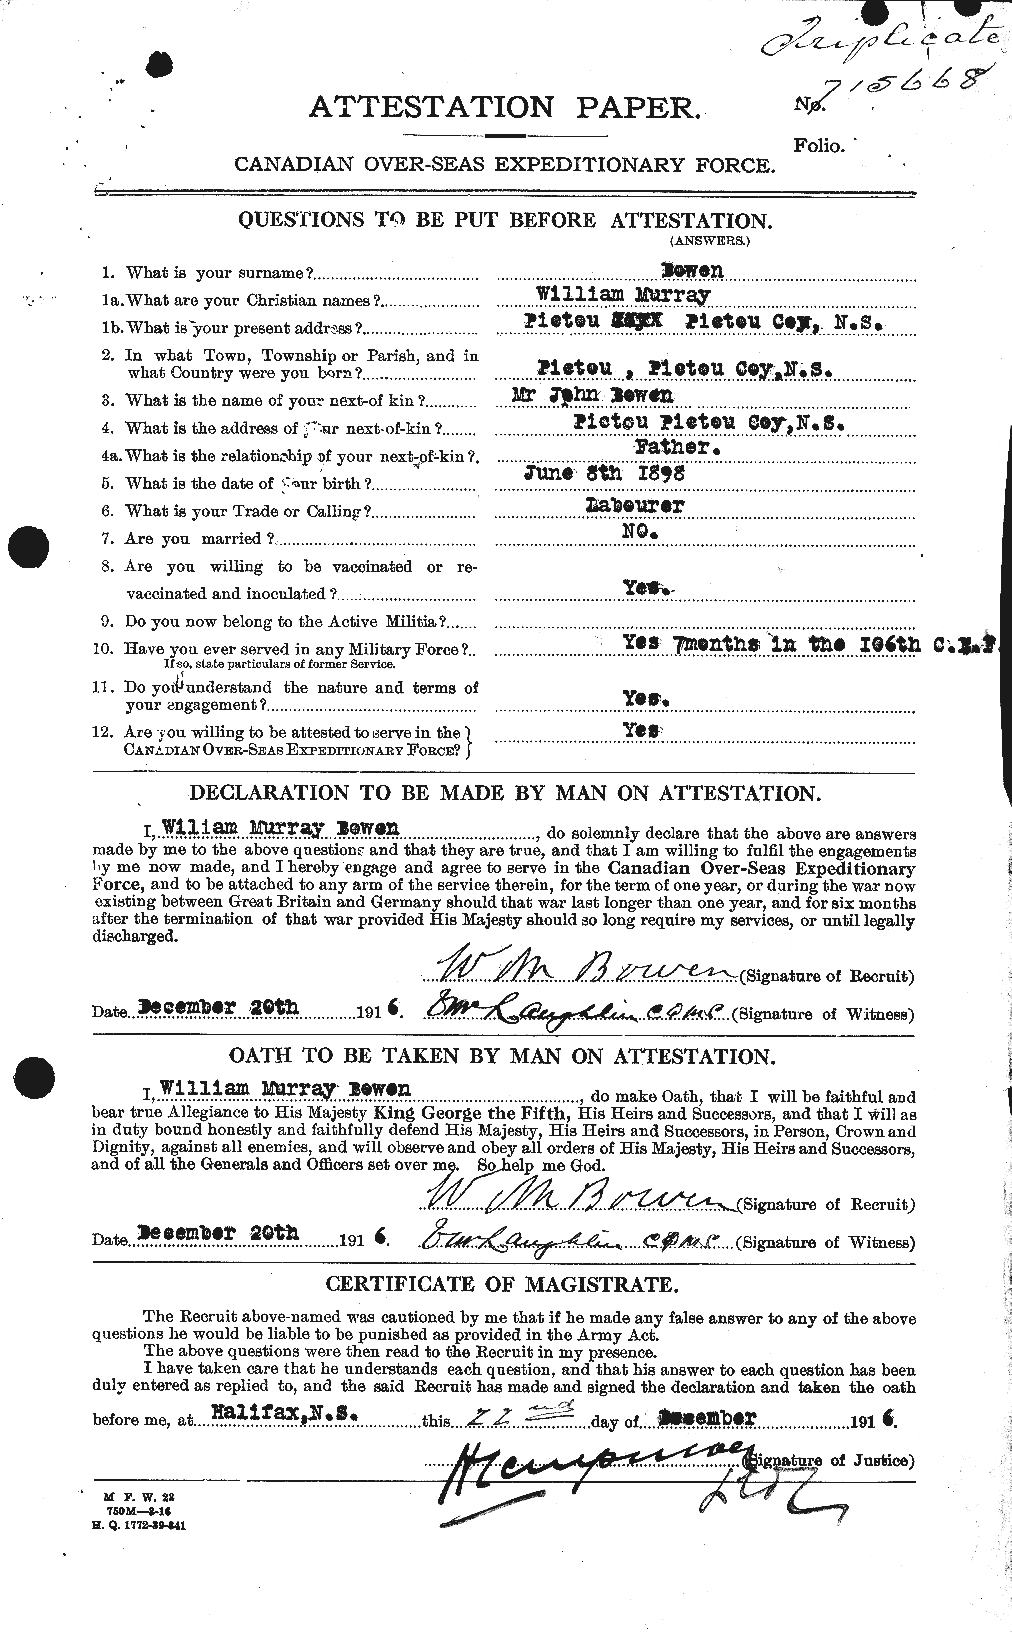 Personnel Records of the First World War - CEF 255489a